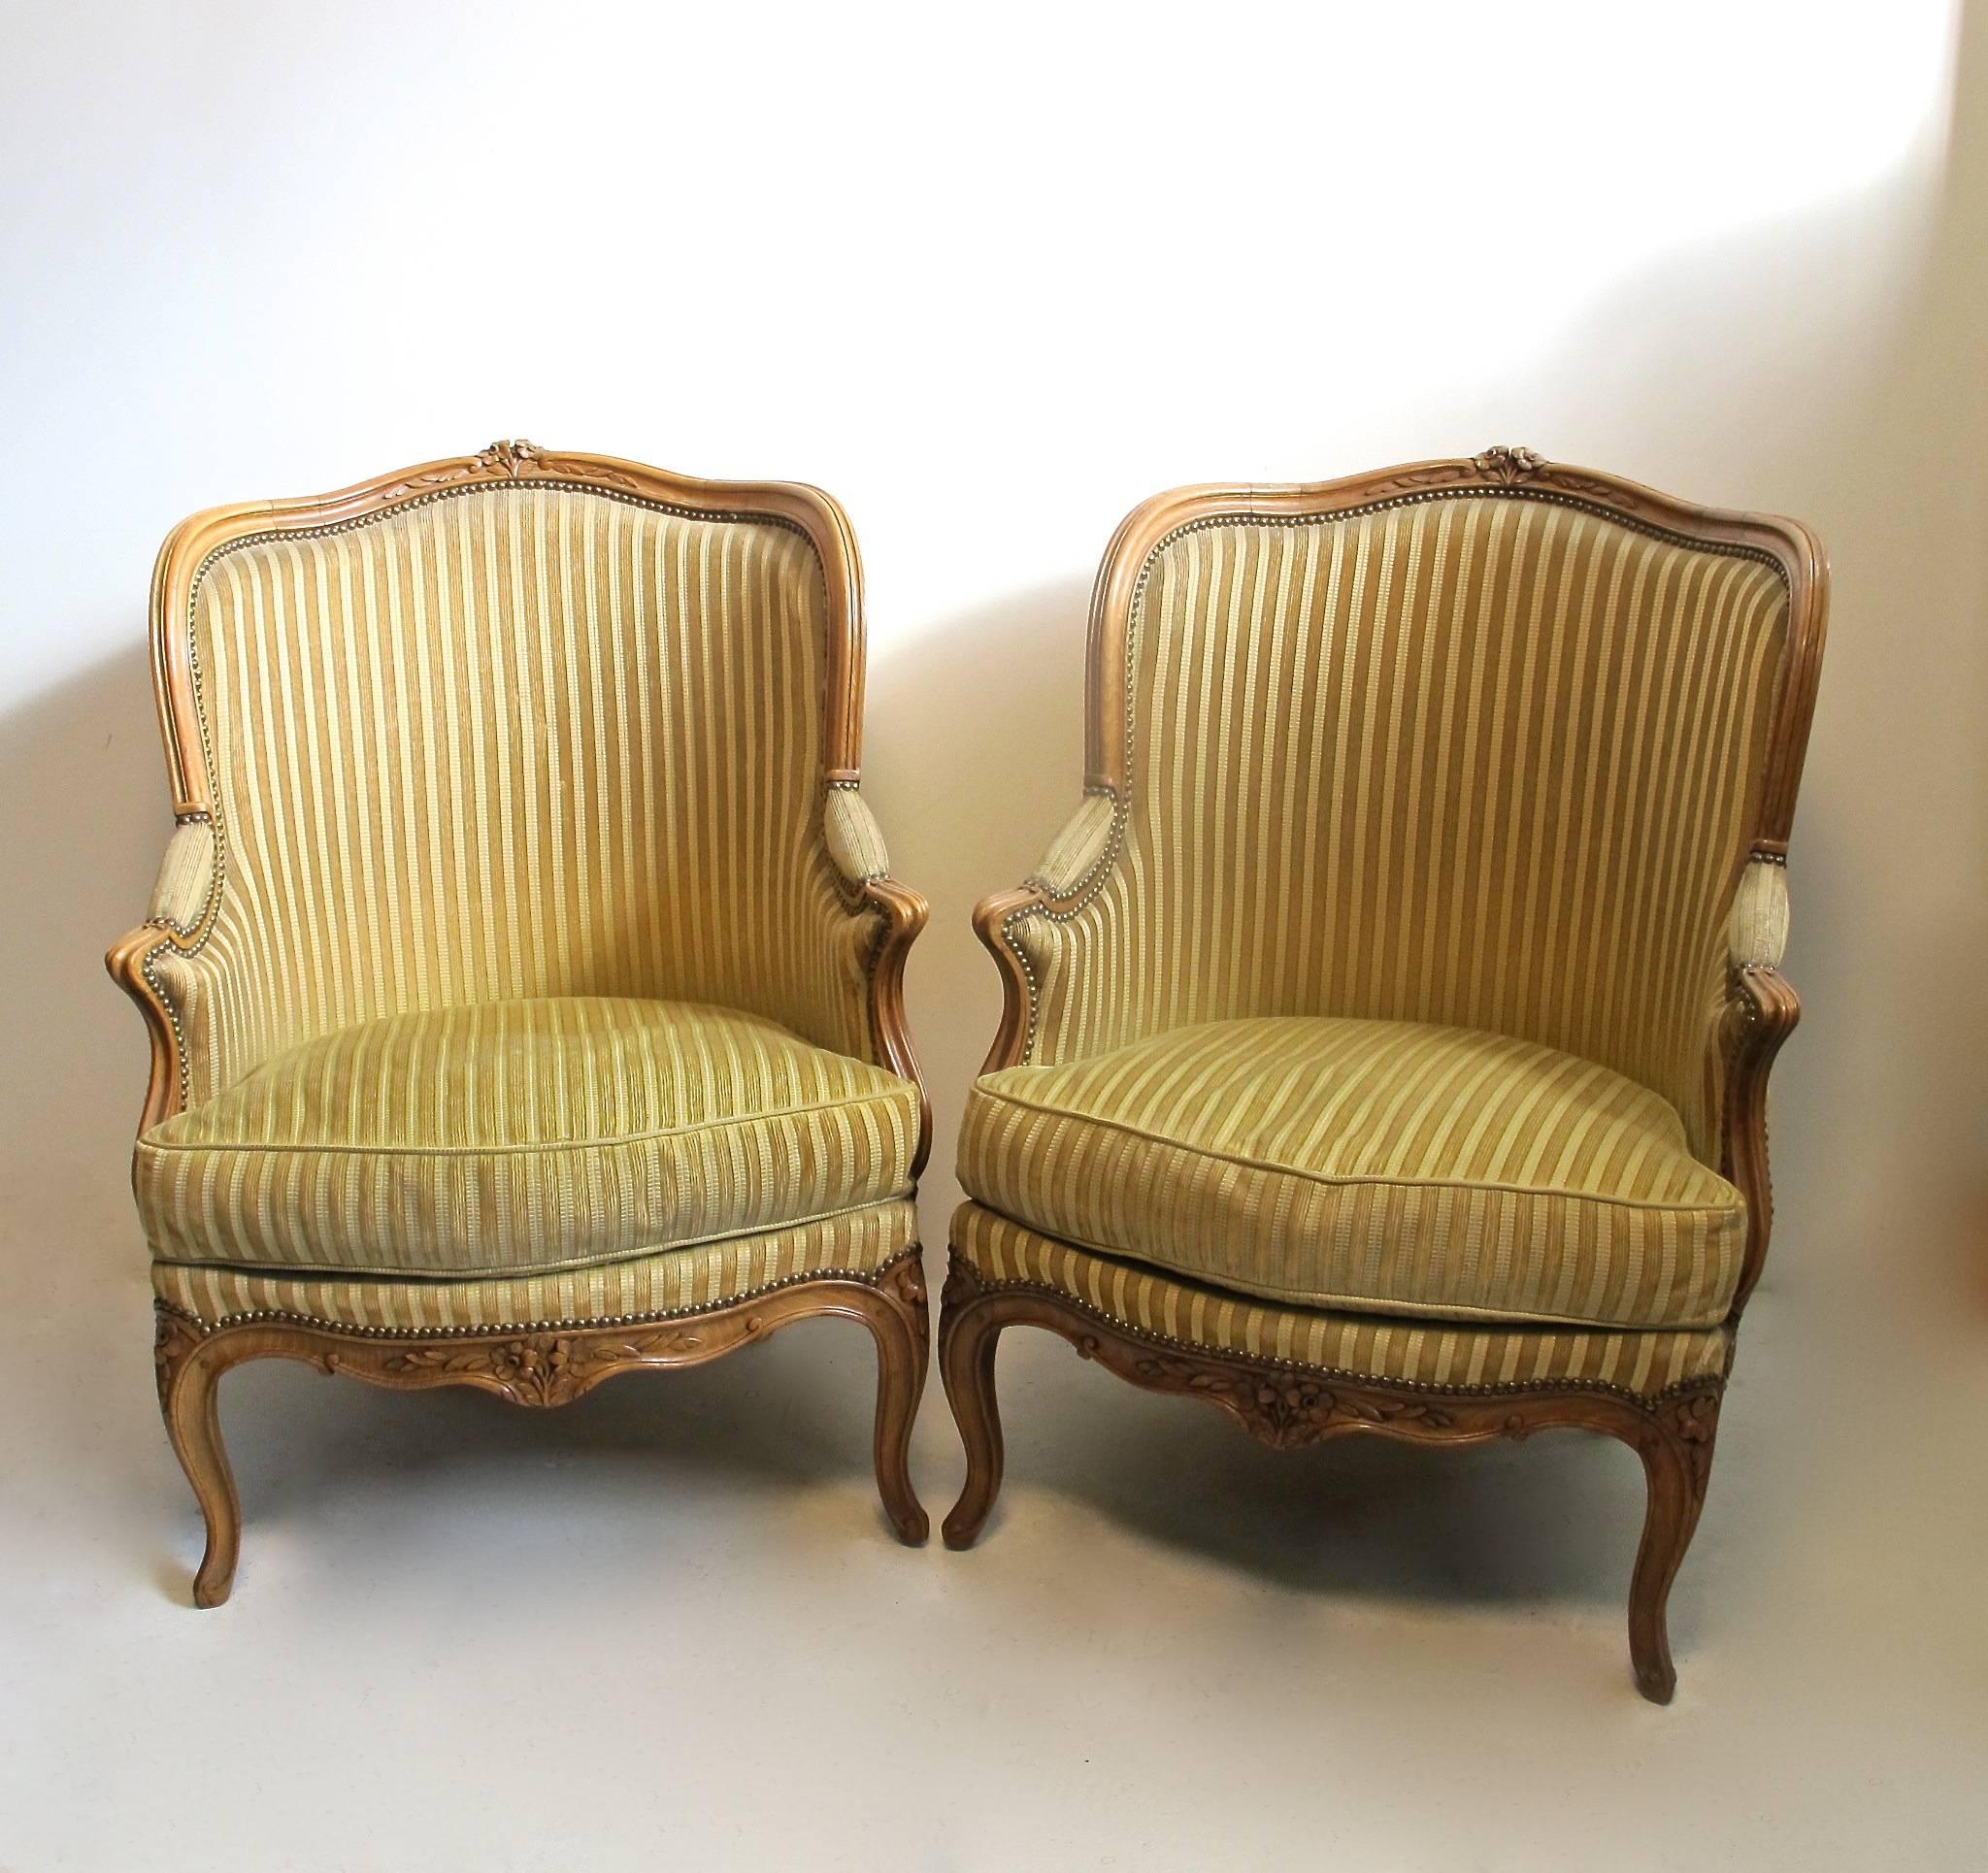 A pair of carved Beechwood and upholstered bergere chairs. Finely crafted with mortise and pegged construction in the manner of 18th century technique. Vintage cut velvet upholstery (shows wear) and down filled cushions.